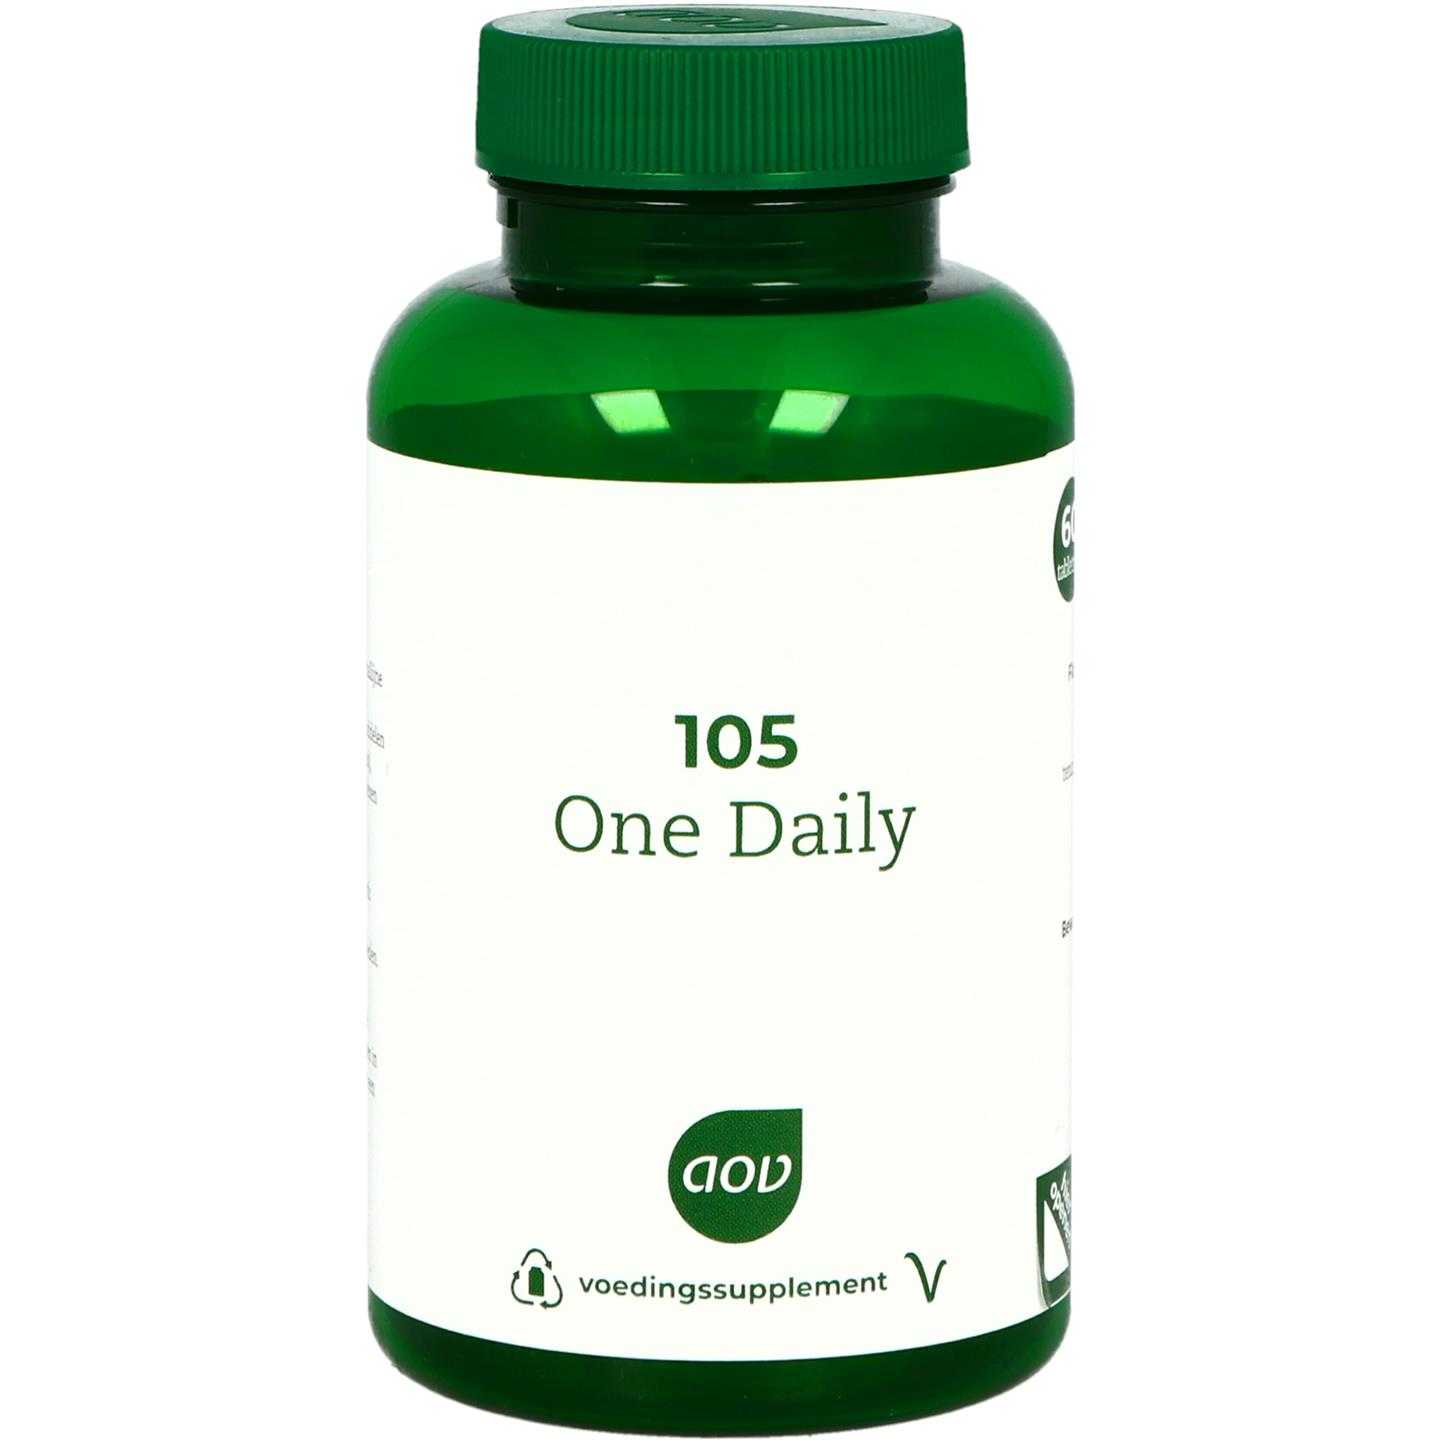 105 One Daily